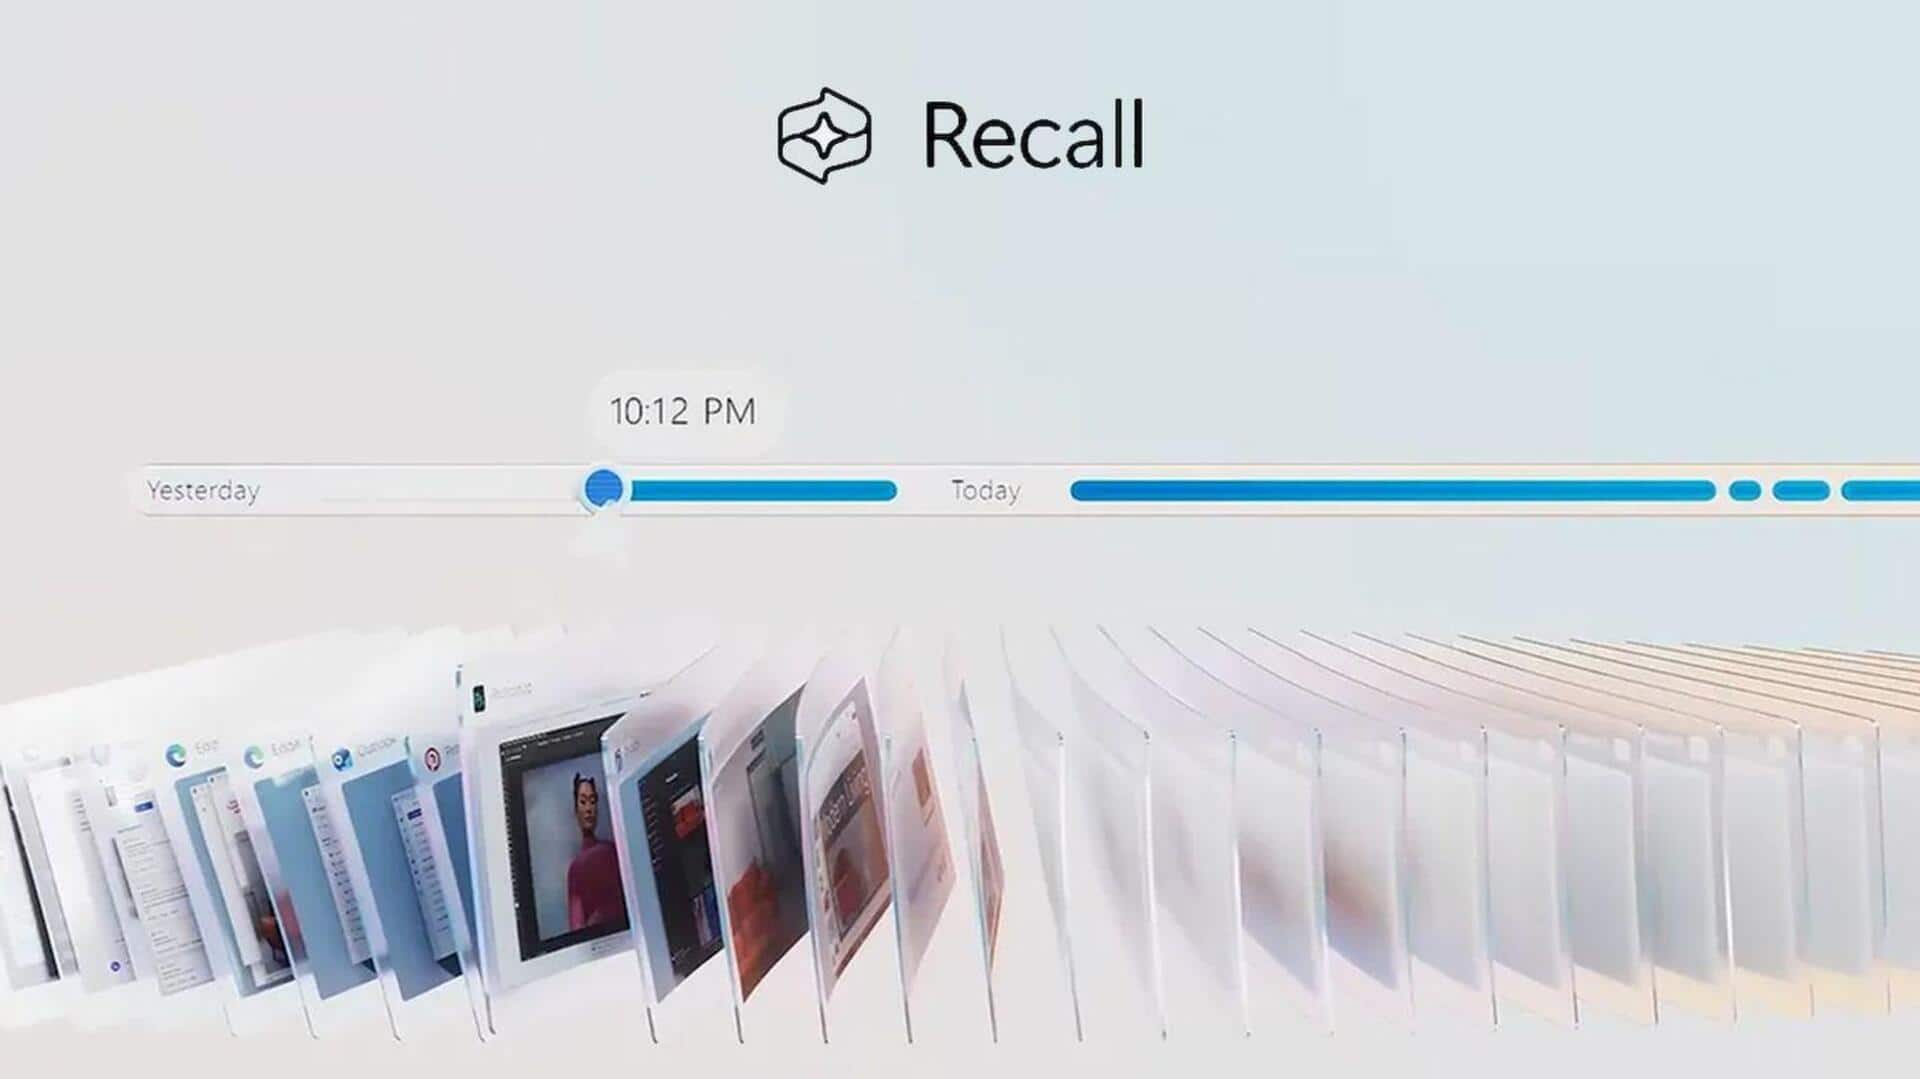 Microsoft responds to privacy concerns over new 'Recall' feature